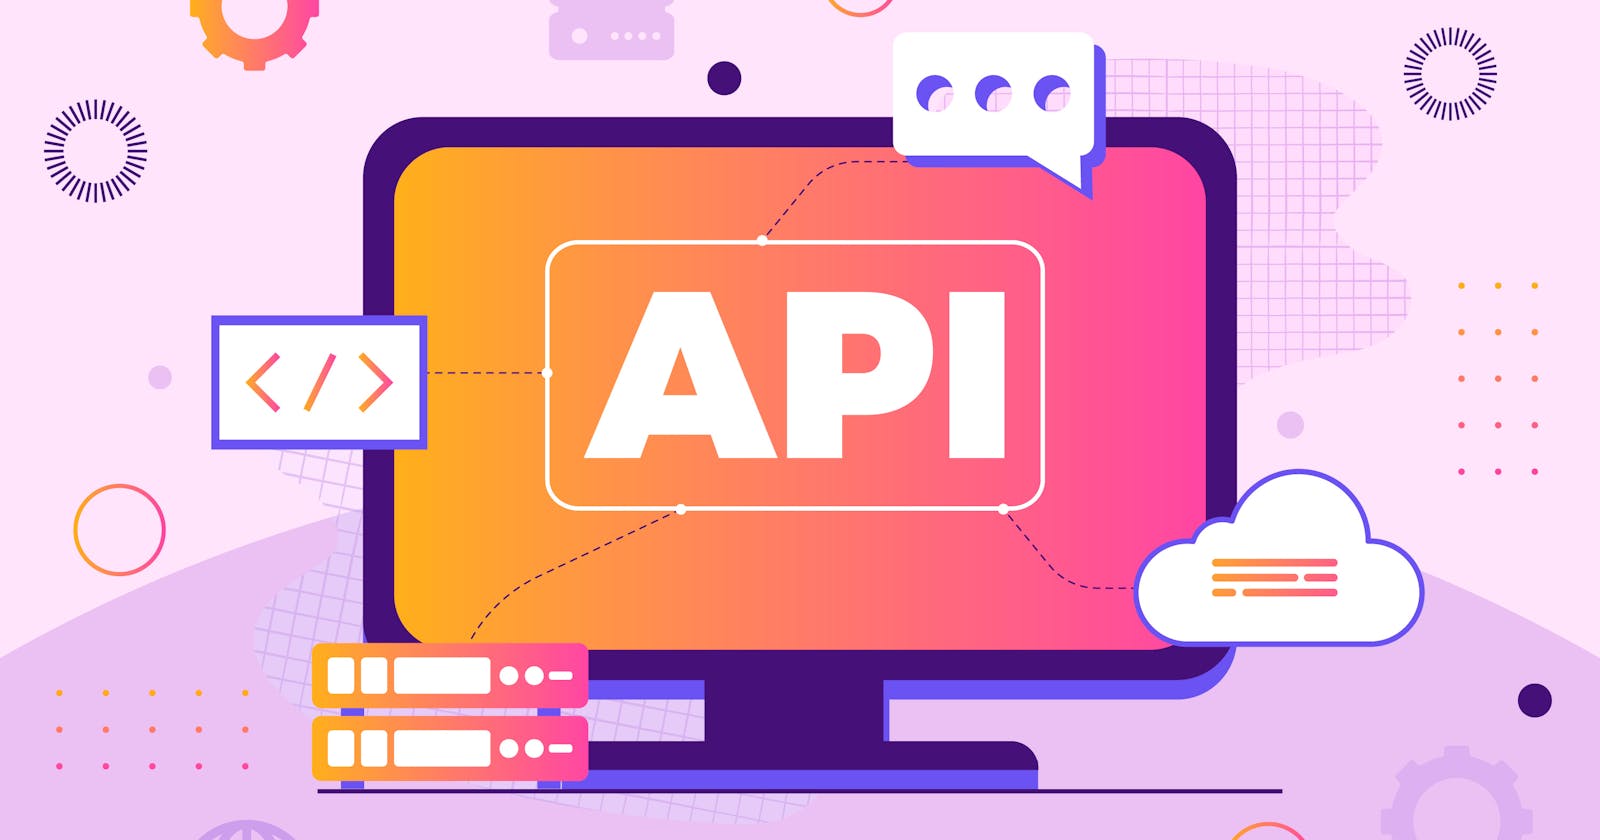 Getting started with REST APIs